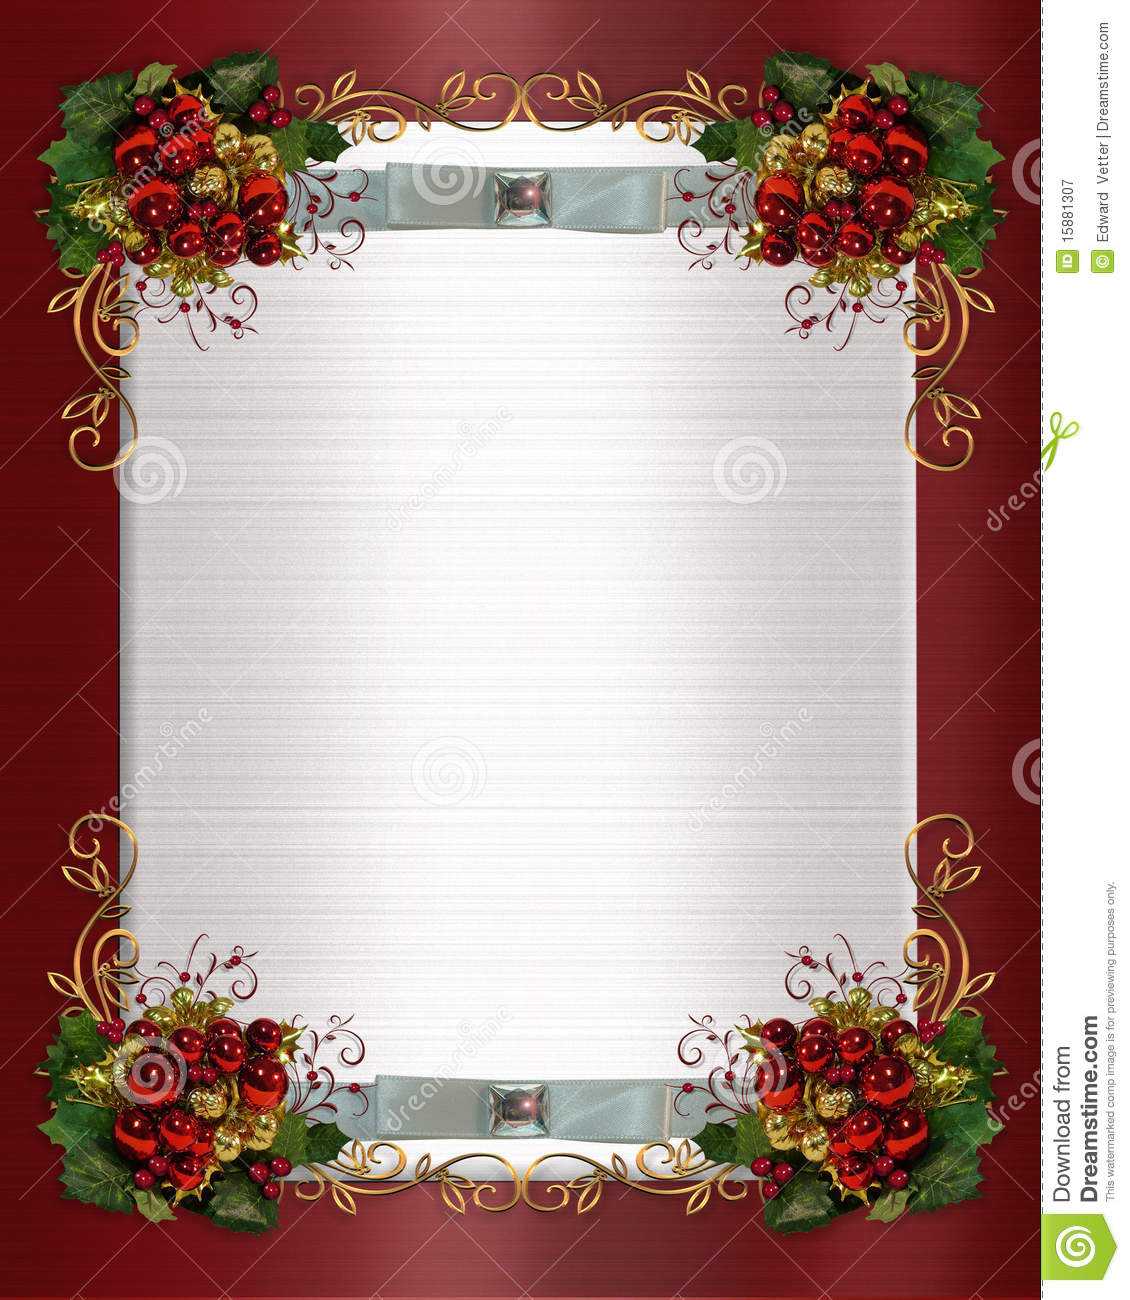 Christmas Or Winter Wedding Border Stock Illustration Within Free Christmas Invitation Templates For Word